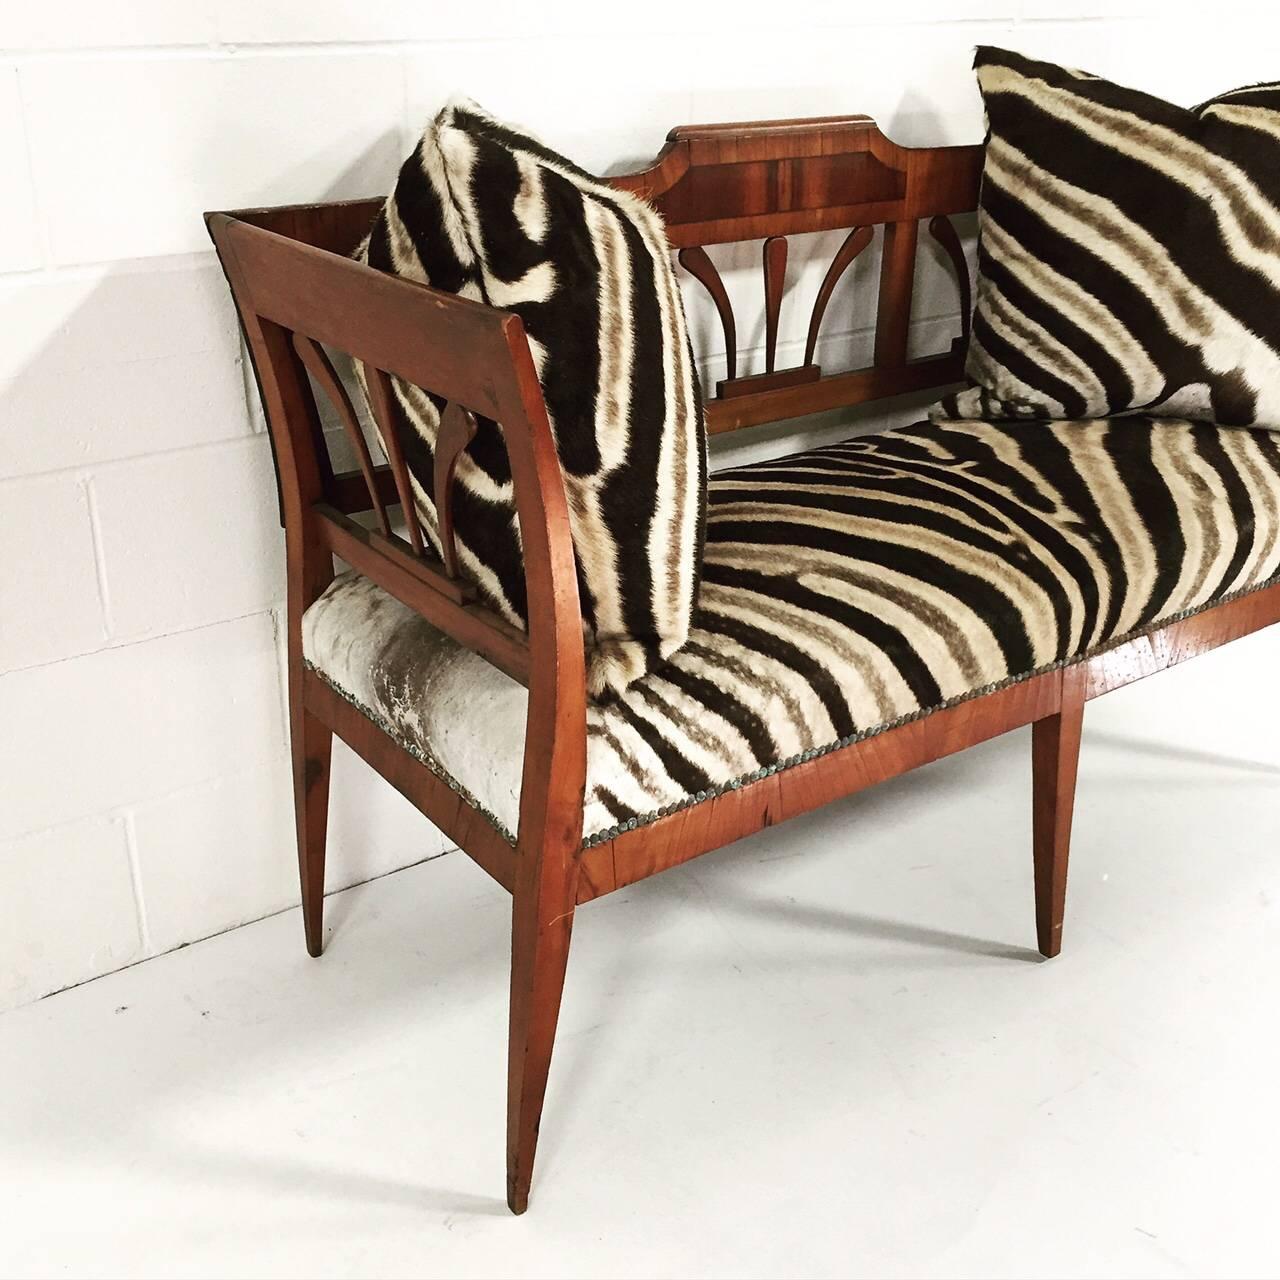 19th Century Fruitwood and Rosewood Settee in Zebra Hide with Zebra Pillows 4